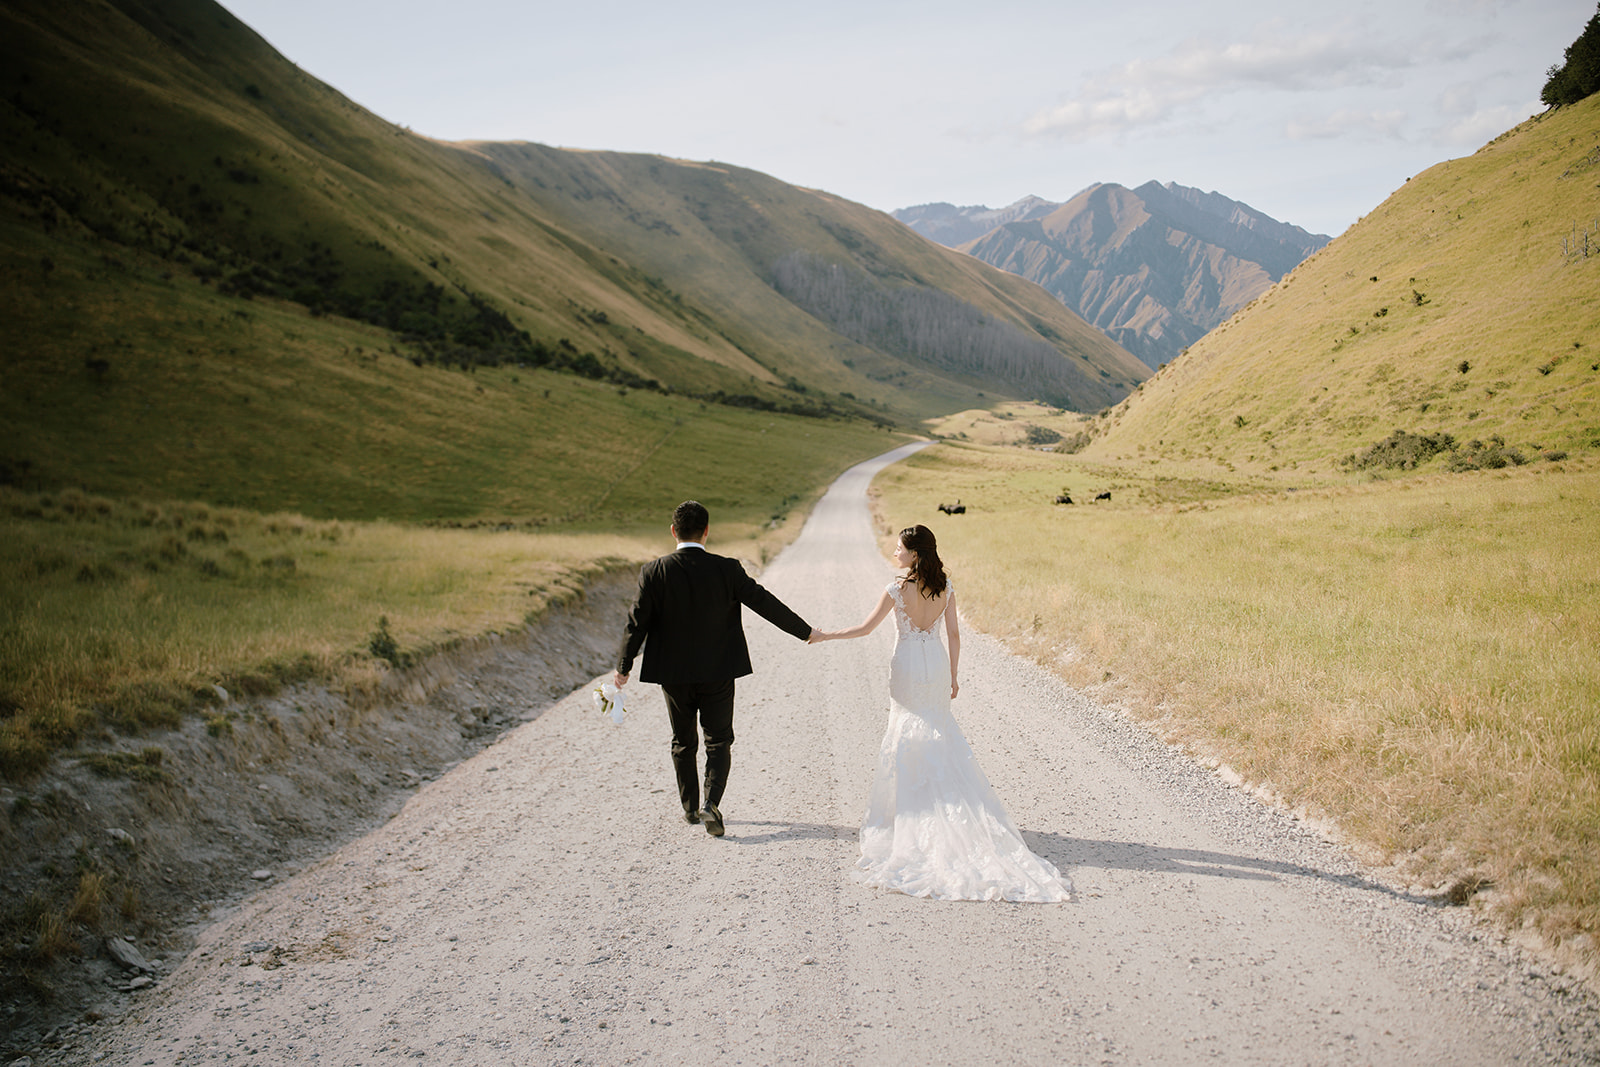 Queenstown Wedding Photographer A bride and groom walking down a dirt road in ウェディングプランニュージーランド the mountains.